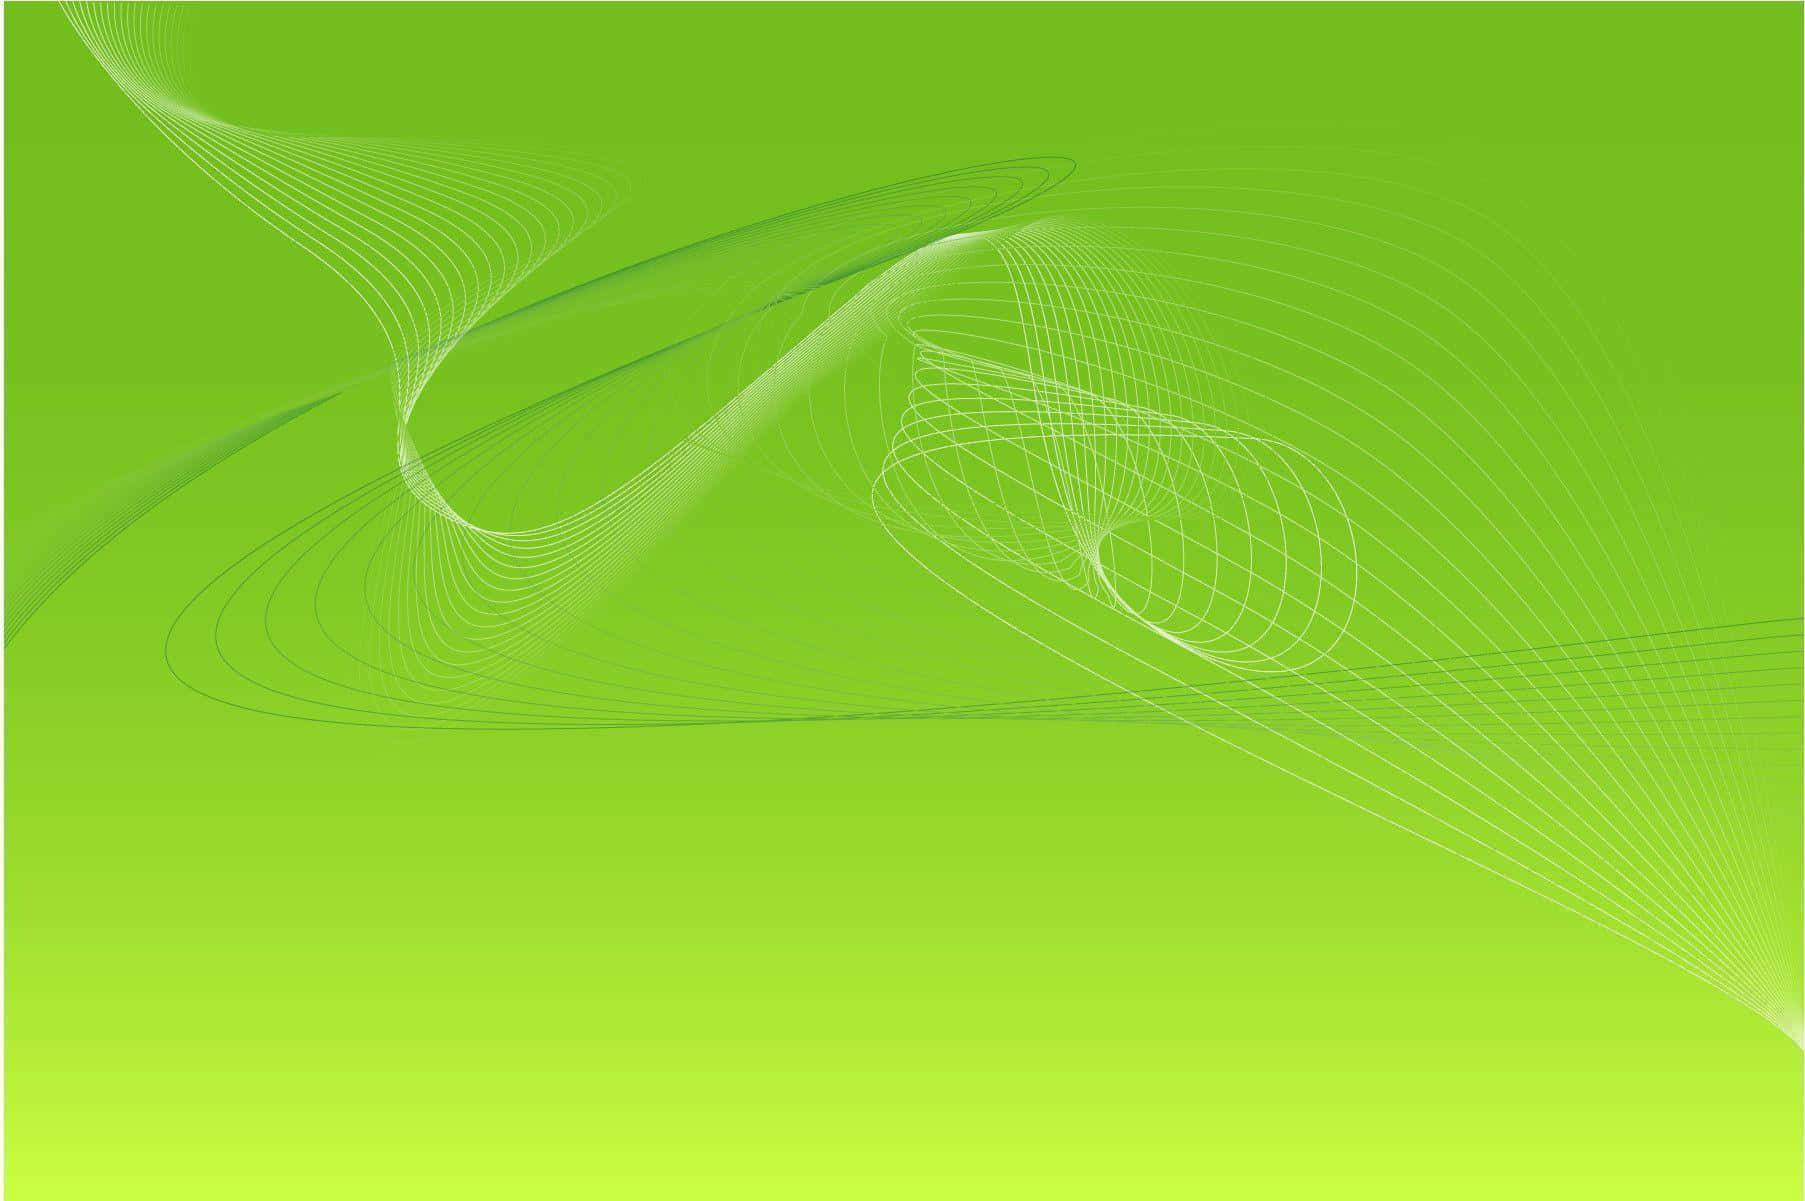 Abstract Wave Line Swirls In Light Green Background